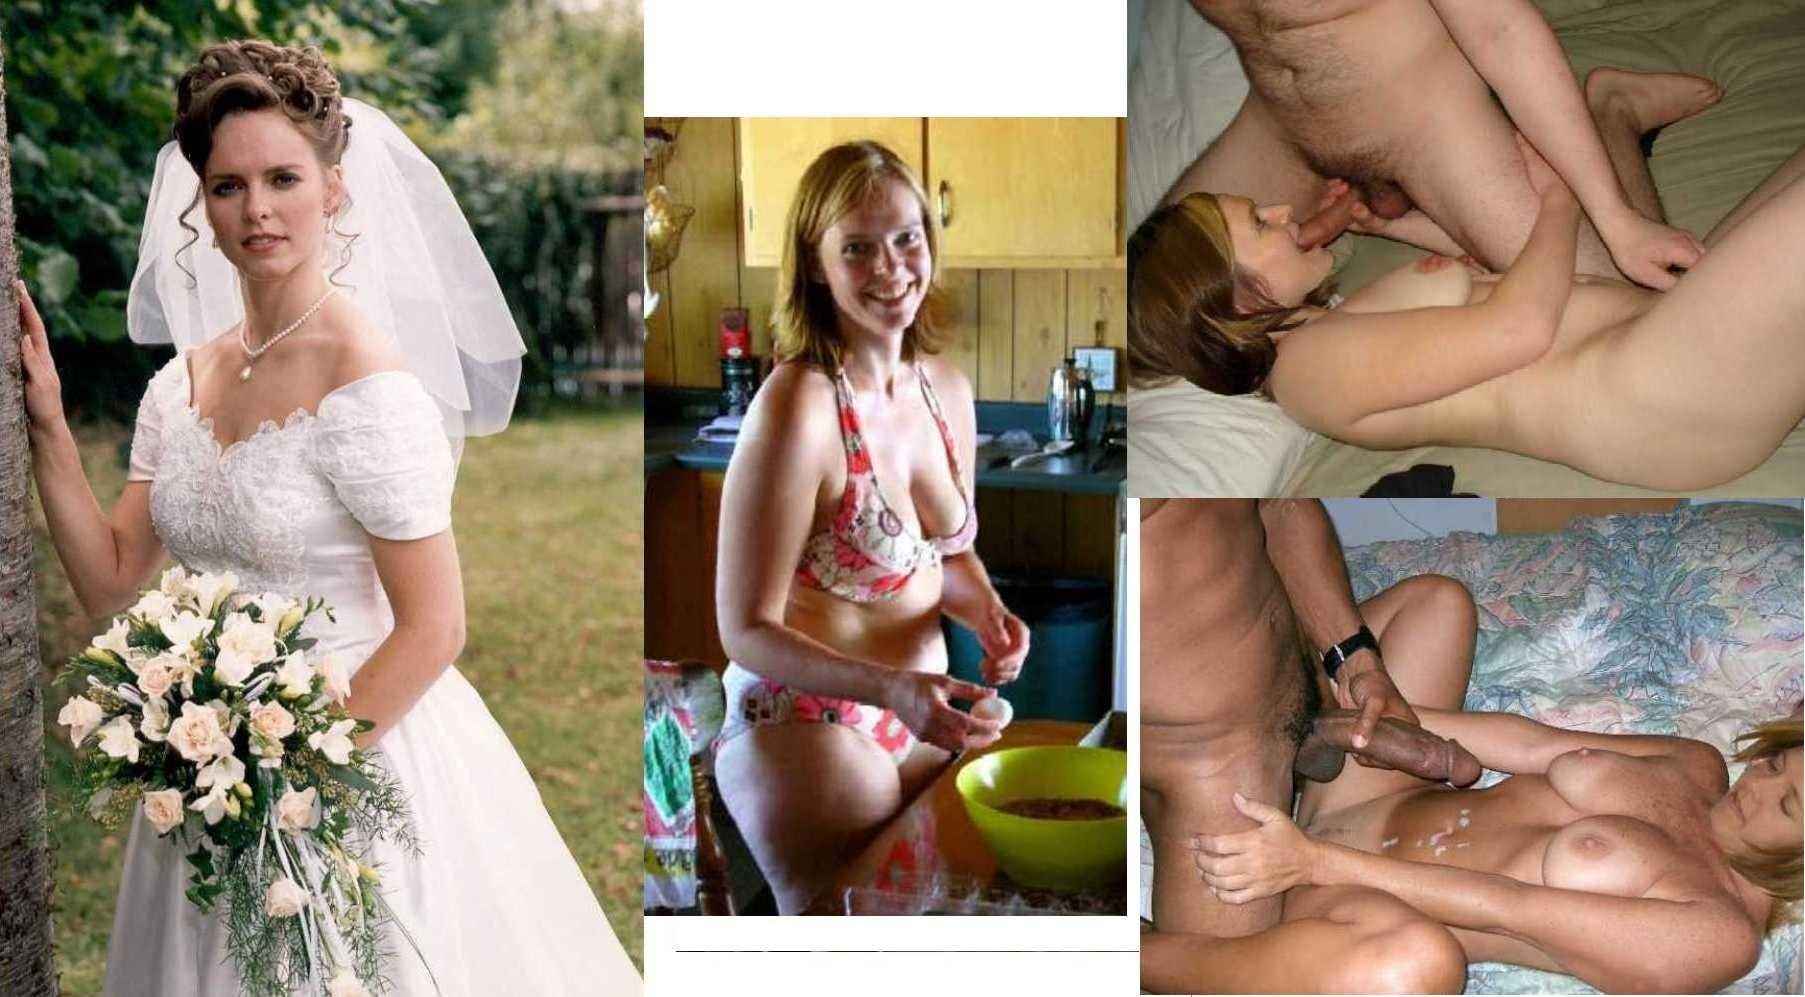 pictures of nude married women